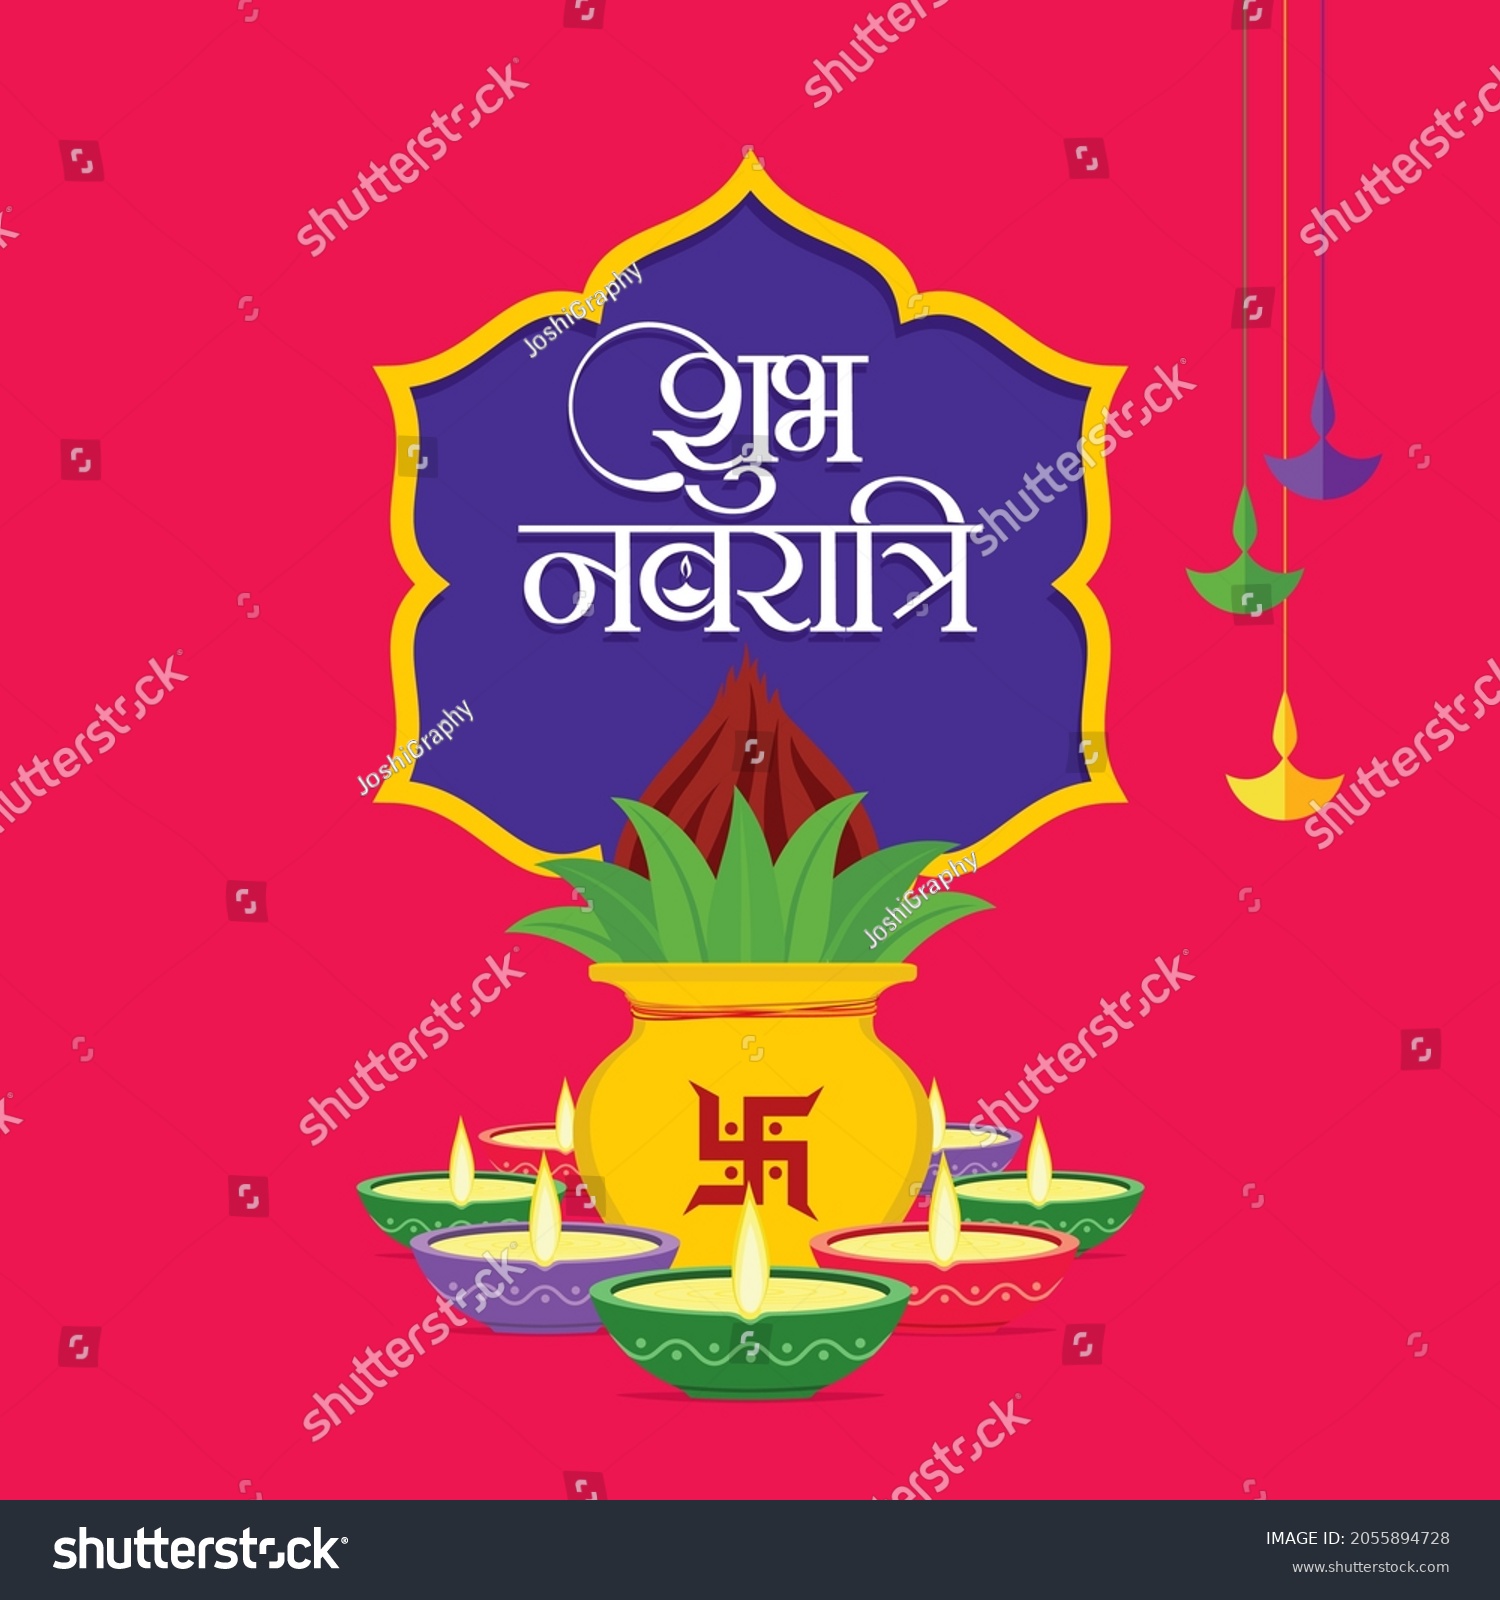 SVG of Hindi Typography - Shubh Navratri - Means Happy Navratri - Template Kalash with Coconut and Oil Lamps svg